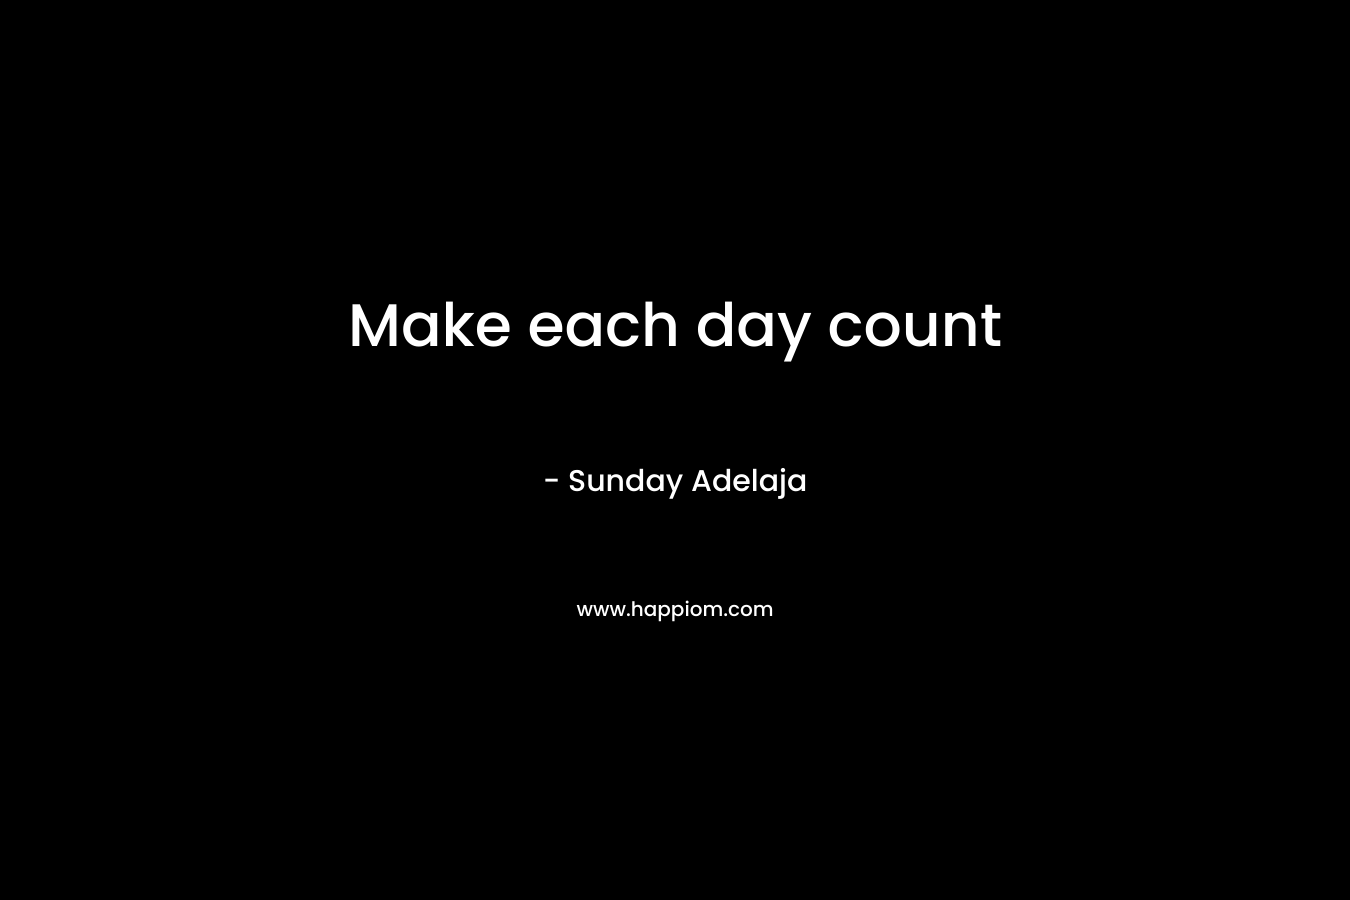 Make each day count